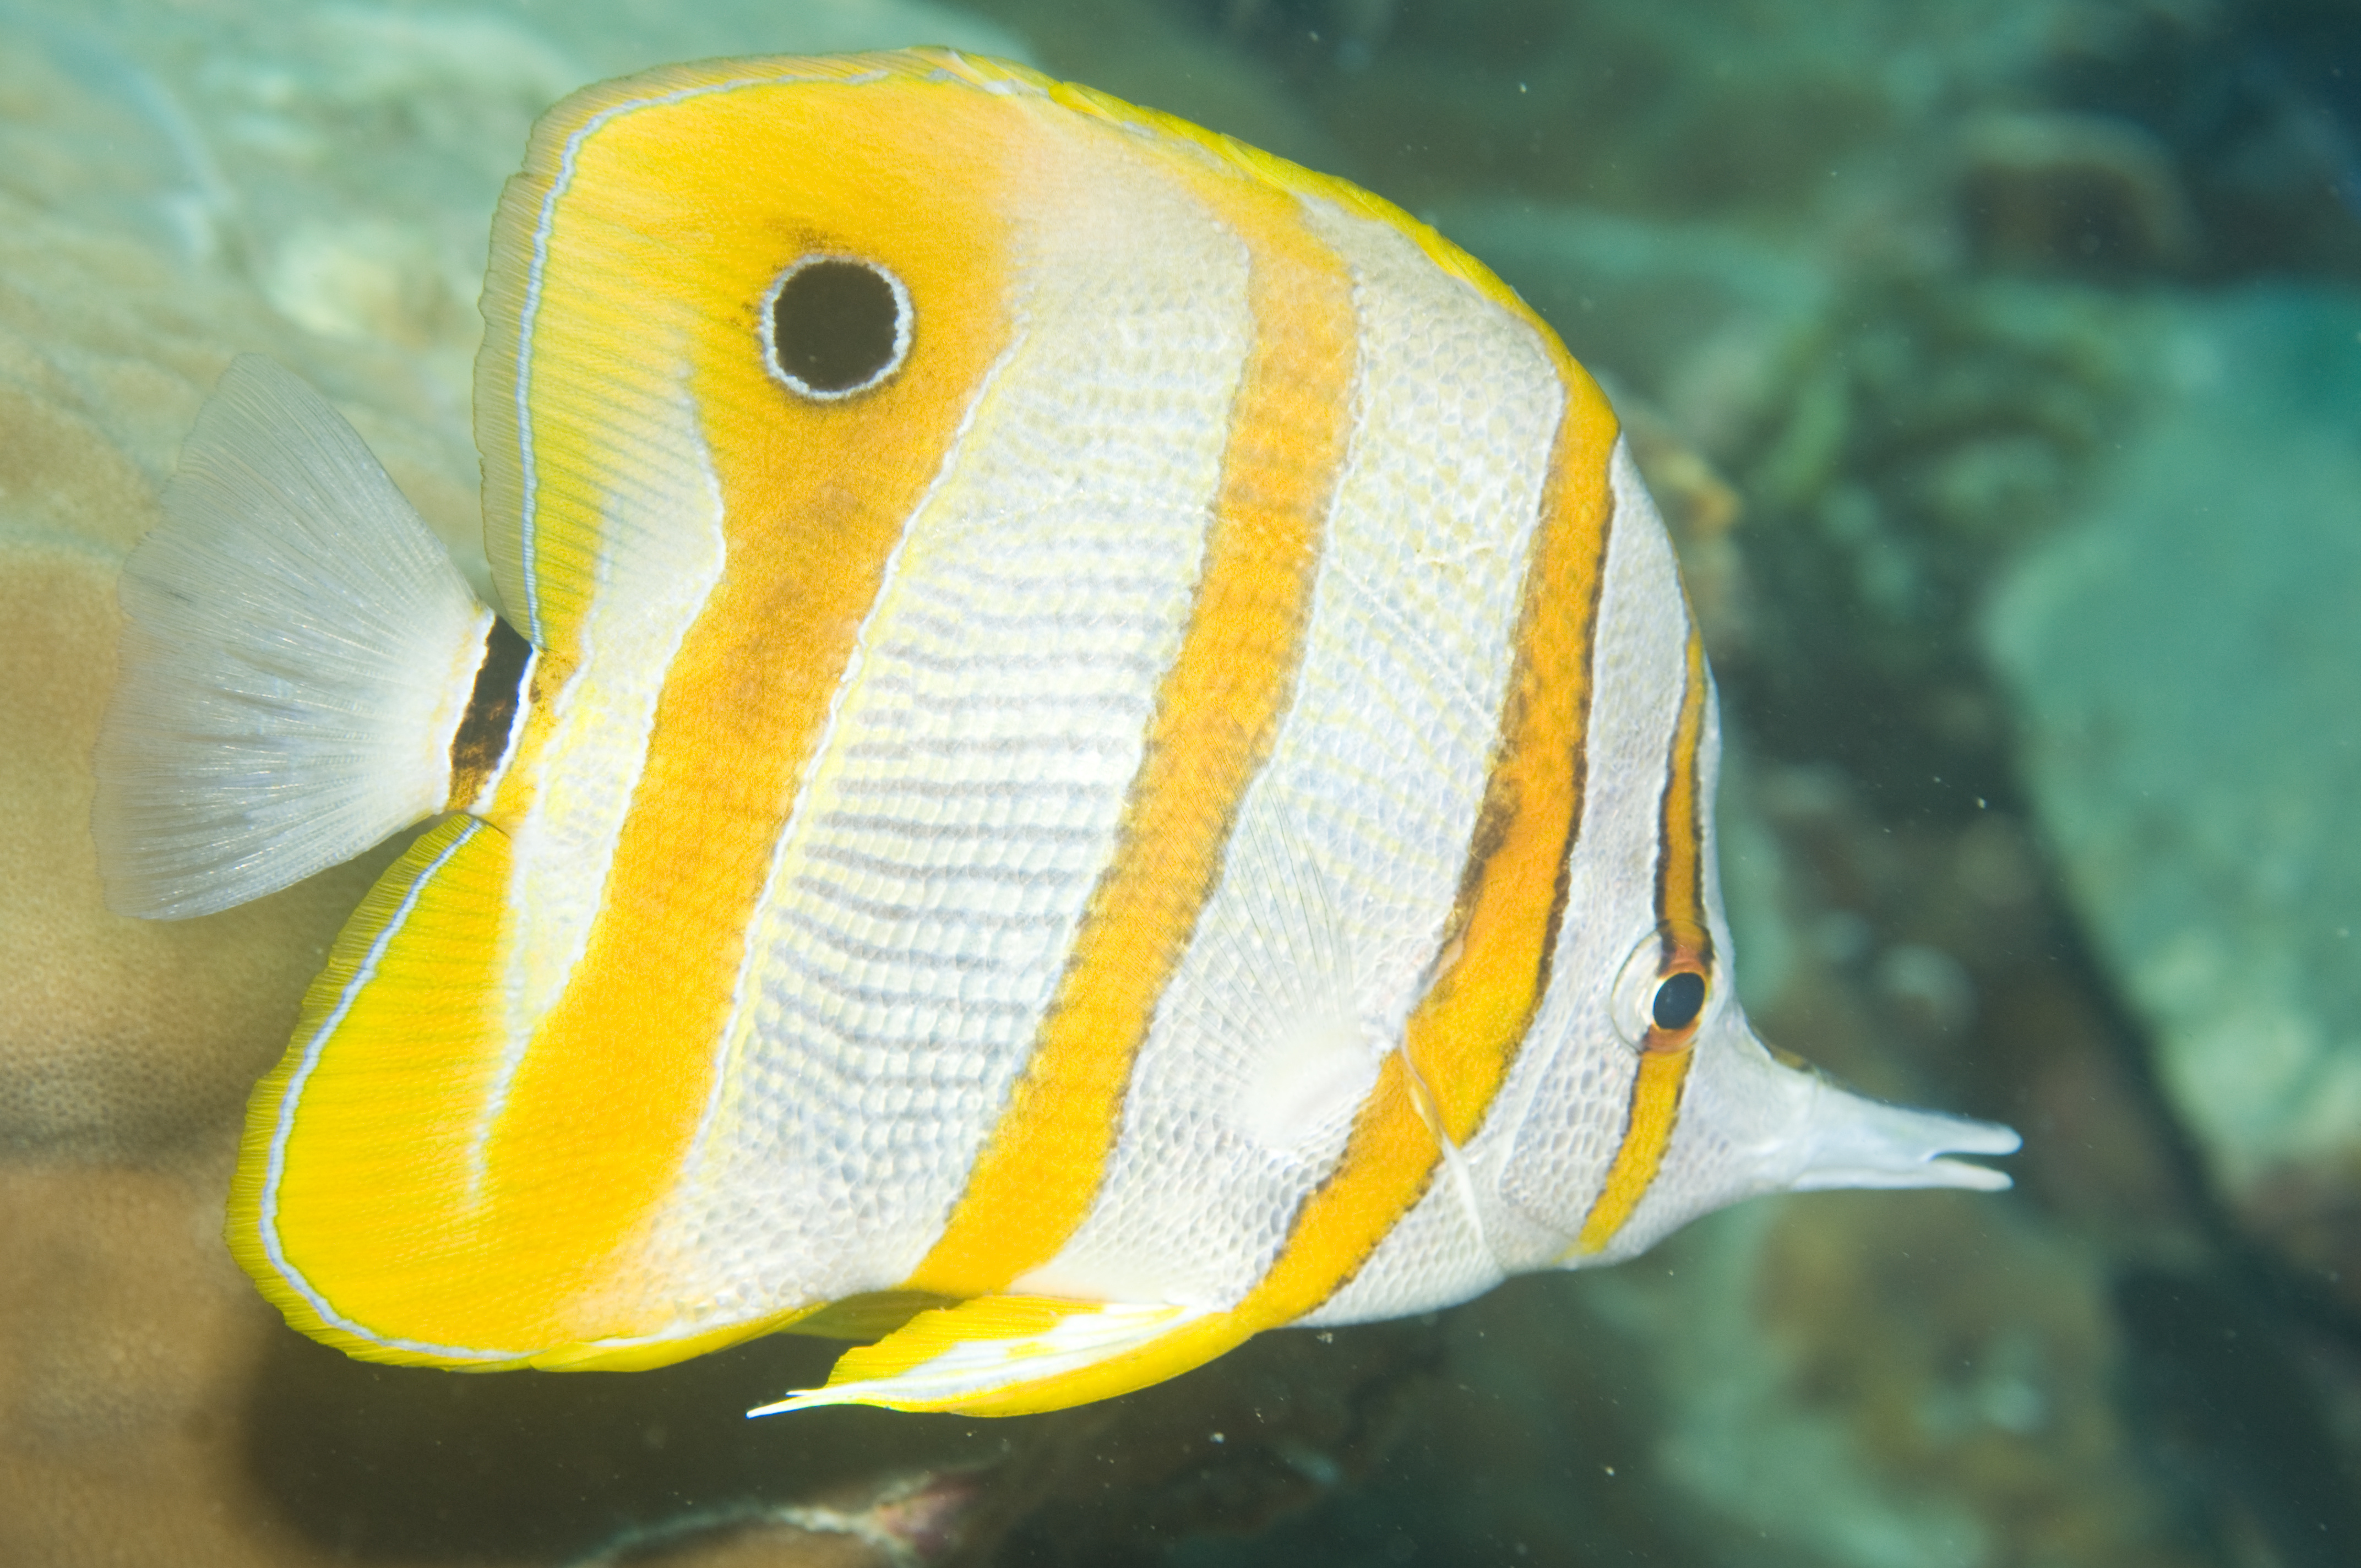 A copperband butterflyfish poses for photos with its bright yellow banding and long snout